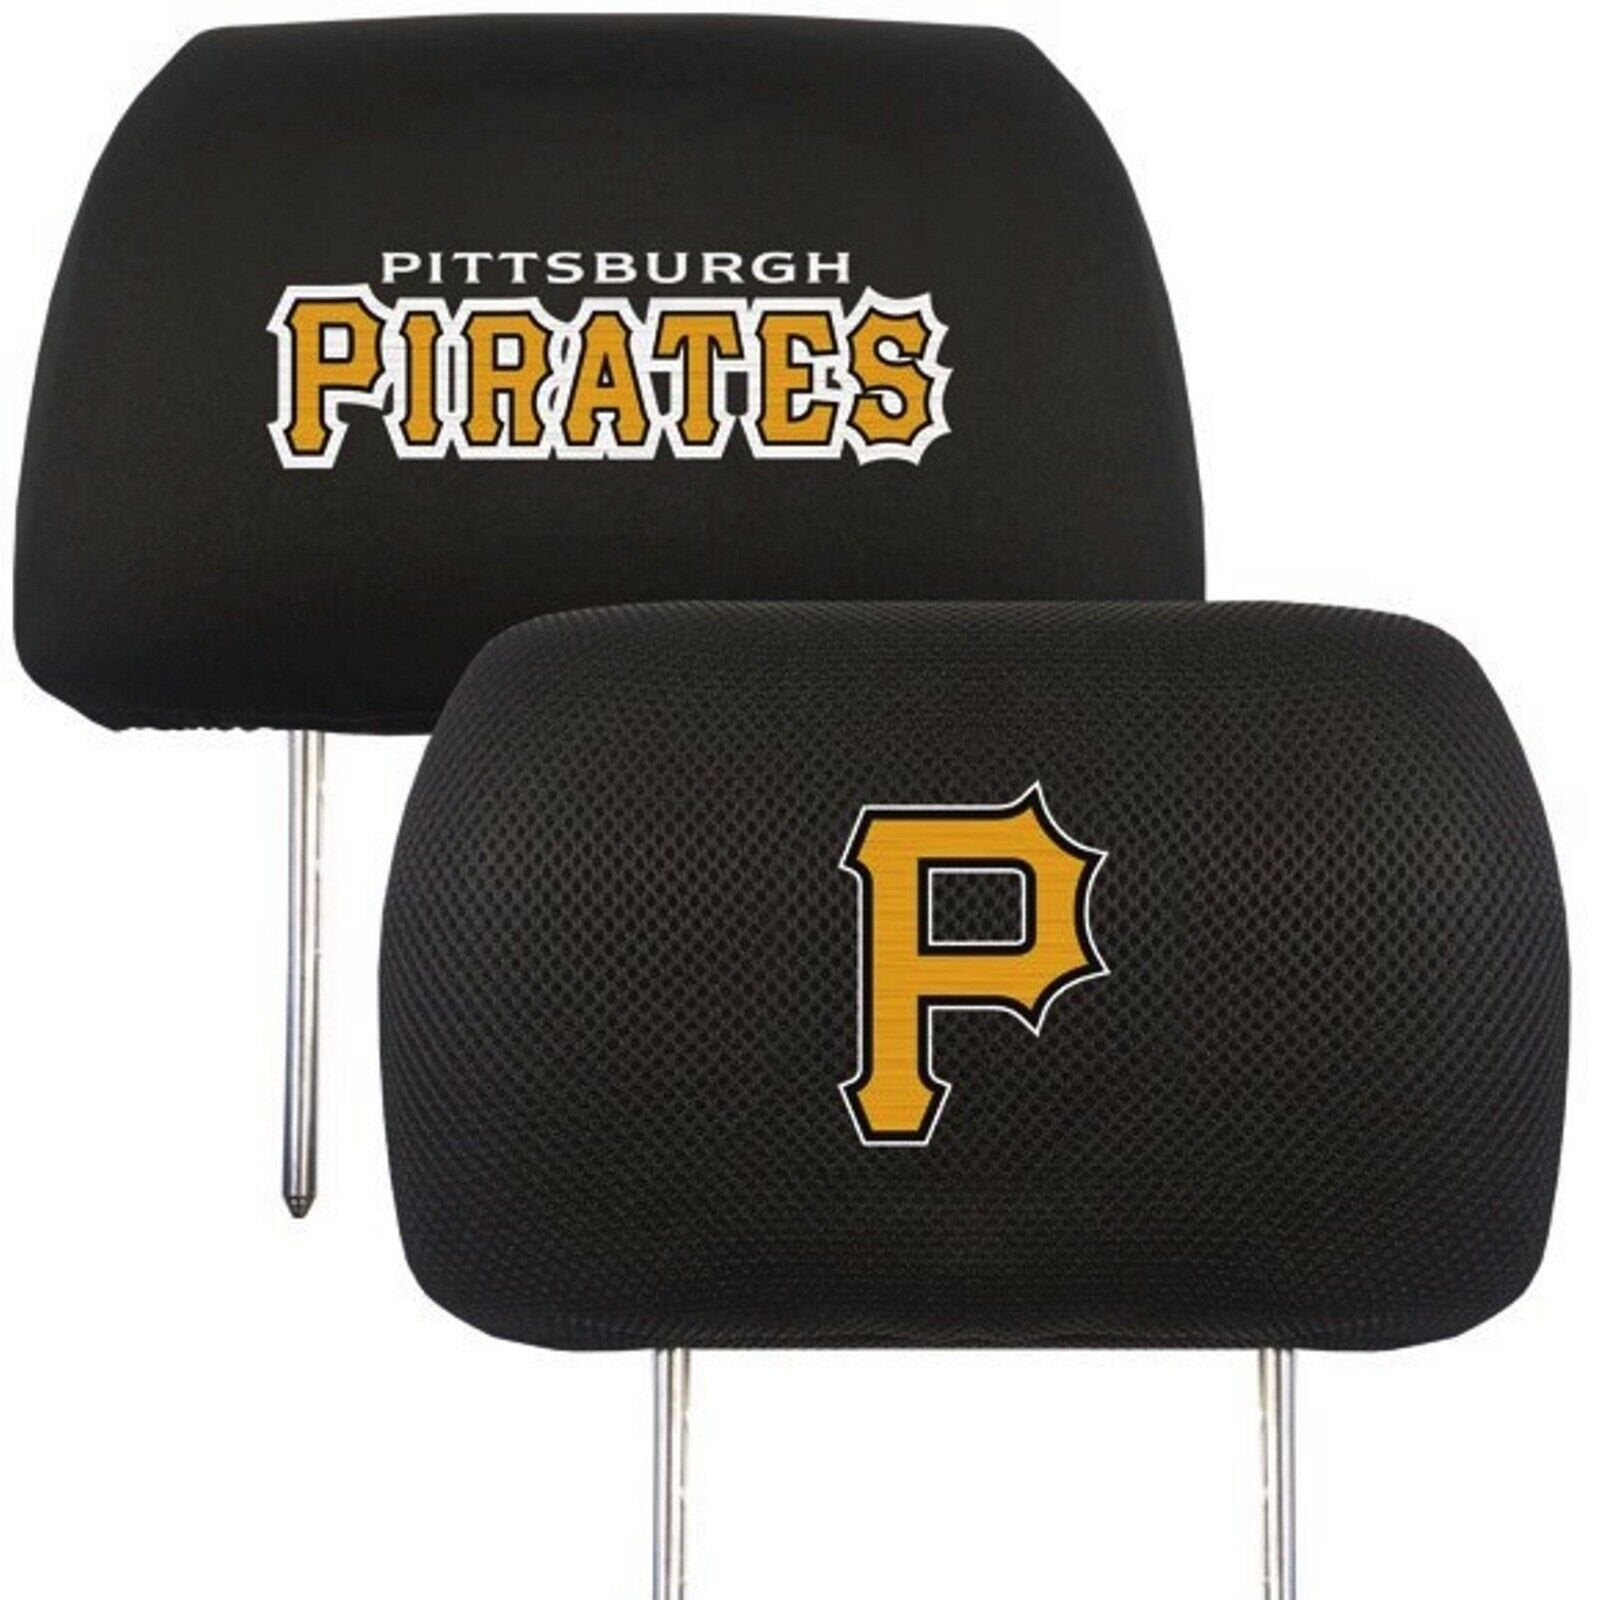 Pittsburgh Pirates Pair of Premium Auto Head Rest Covers, Embroidered, Black Elastic, 14x10 Inch